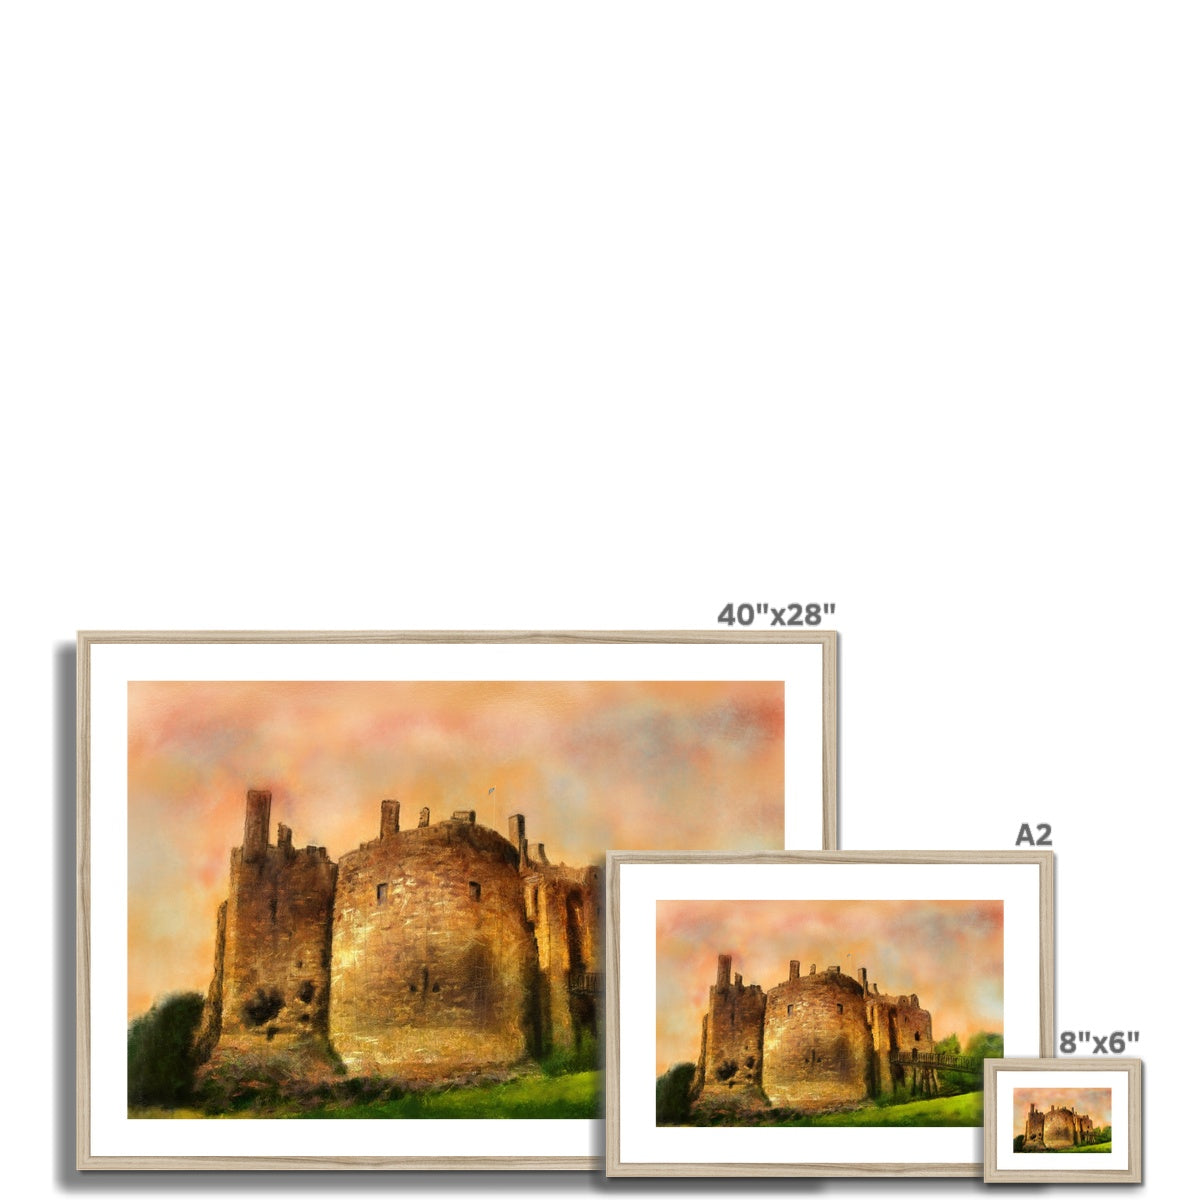 Dirleton Castle Dusk Painting | Framed & Mounted Prints From Scotland-Framed & Mounted Prints-Historic & Iconic Scotland Art Gallery-Paintings, Prints, Homeware, Art Gifts From Scotland By Scottish Artist Kevin Hunter